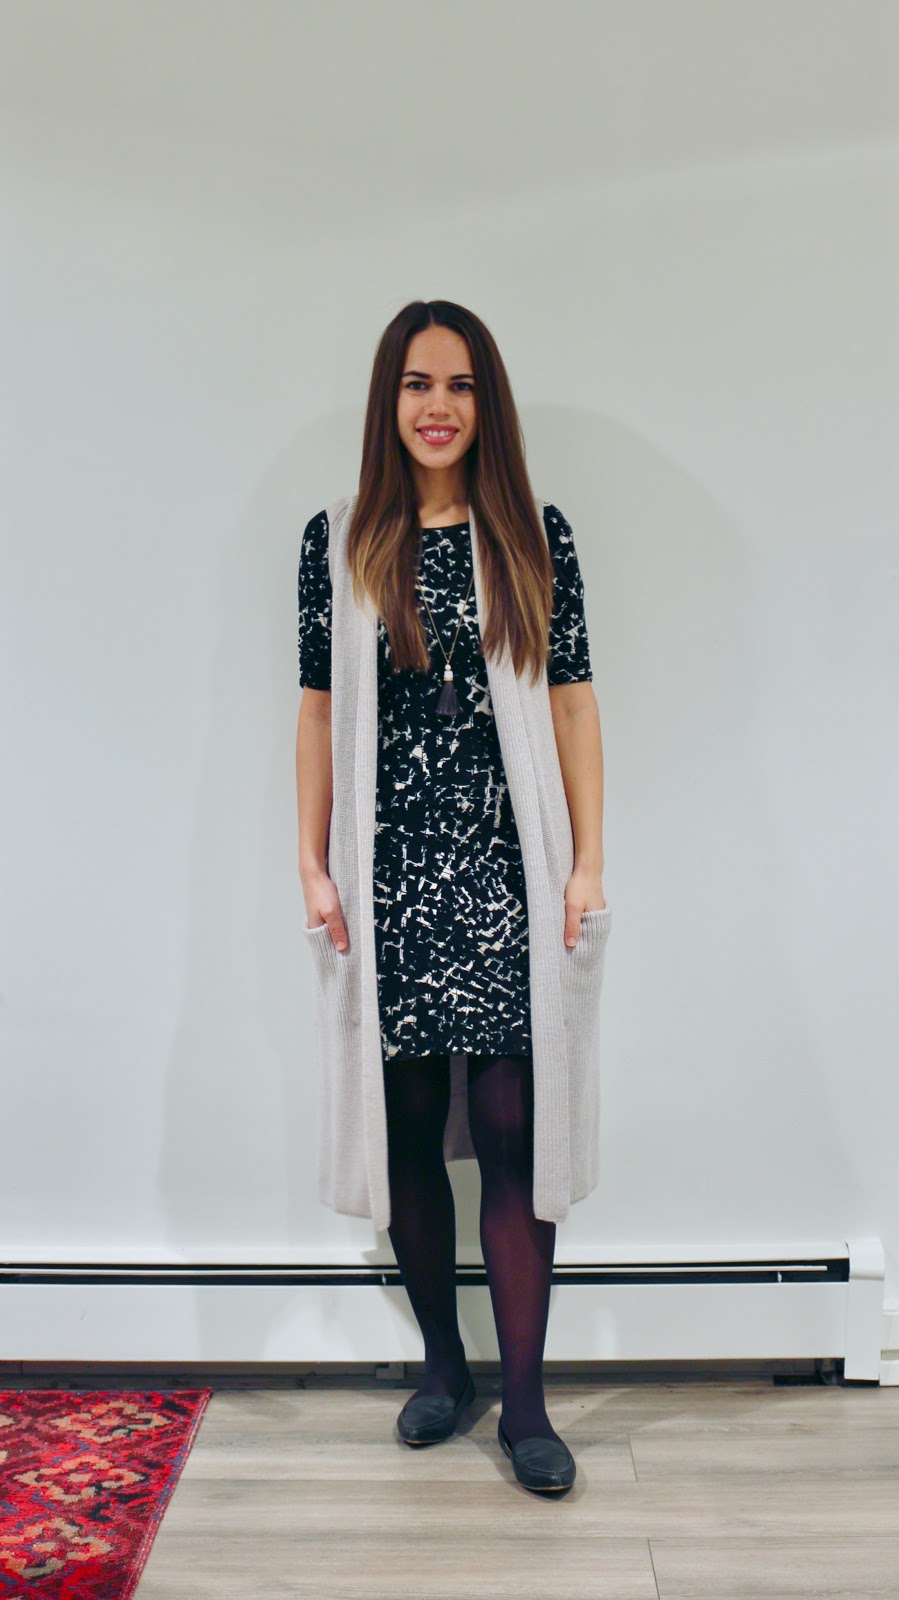 Jules in Flats - Patterned Sheath Dress with Wilfred Olivie Sweater Vest (Business Casual Winter Workwear on a Budget)